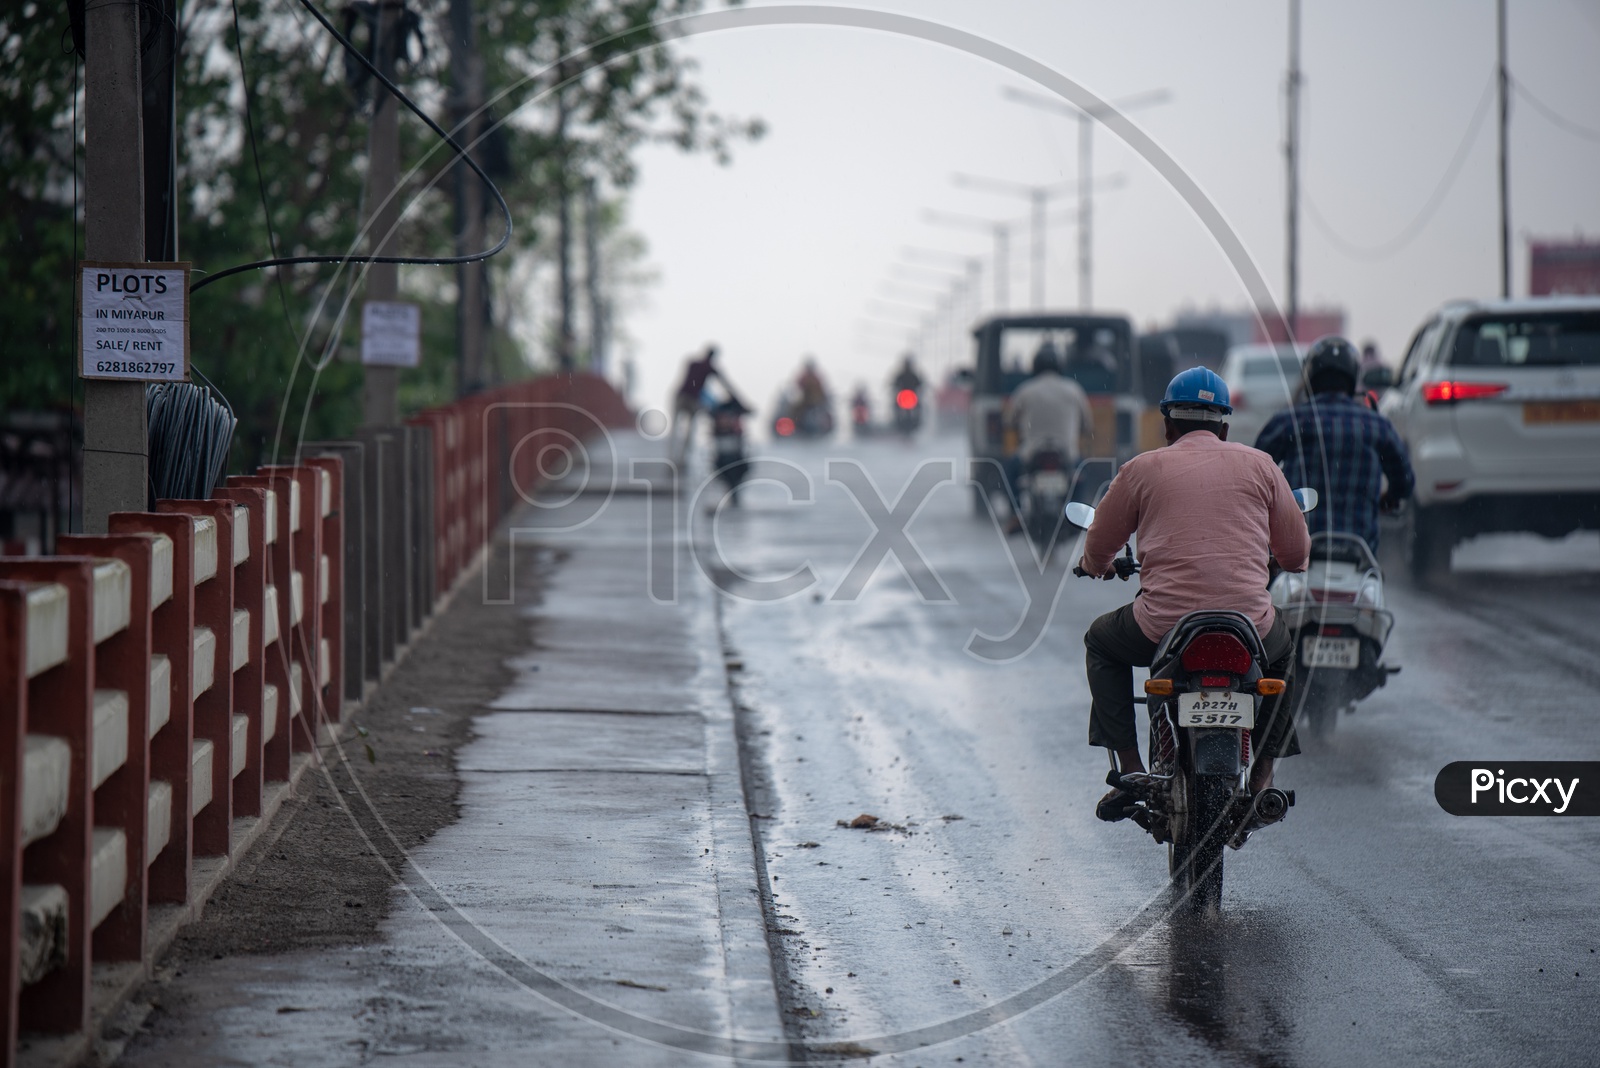 A Motorcyclist or Bike Rider On the Road In a Rainy Day